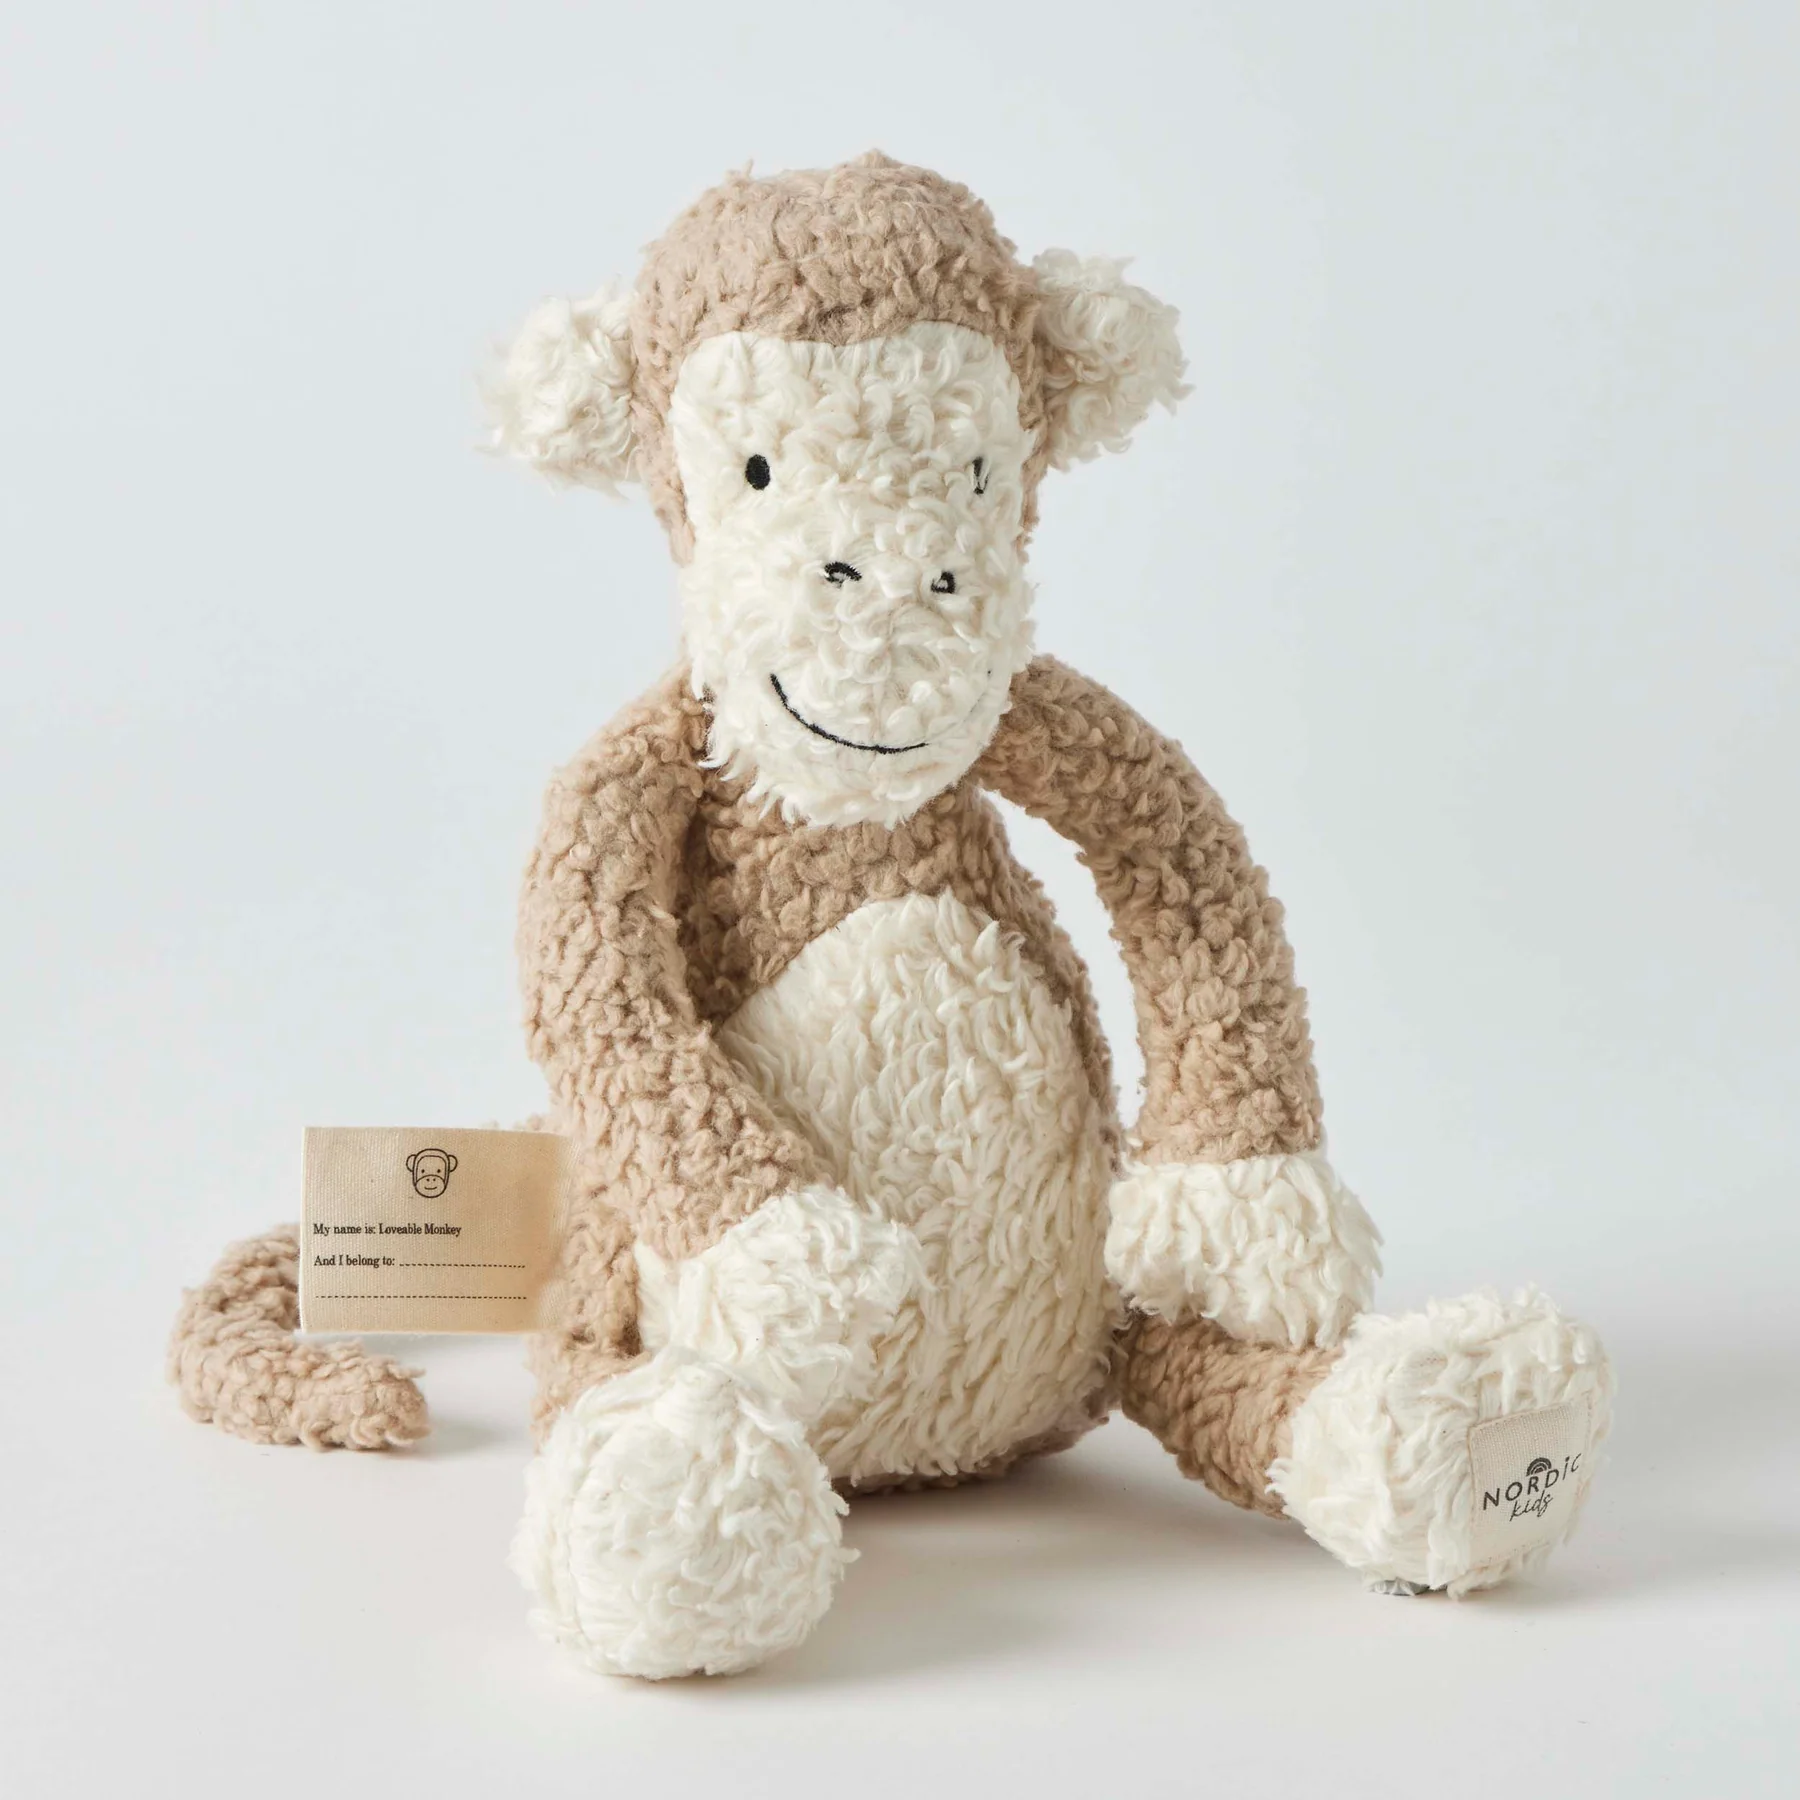 Adorable Baby Soft Toys - Perfect Companions for Little Ones